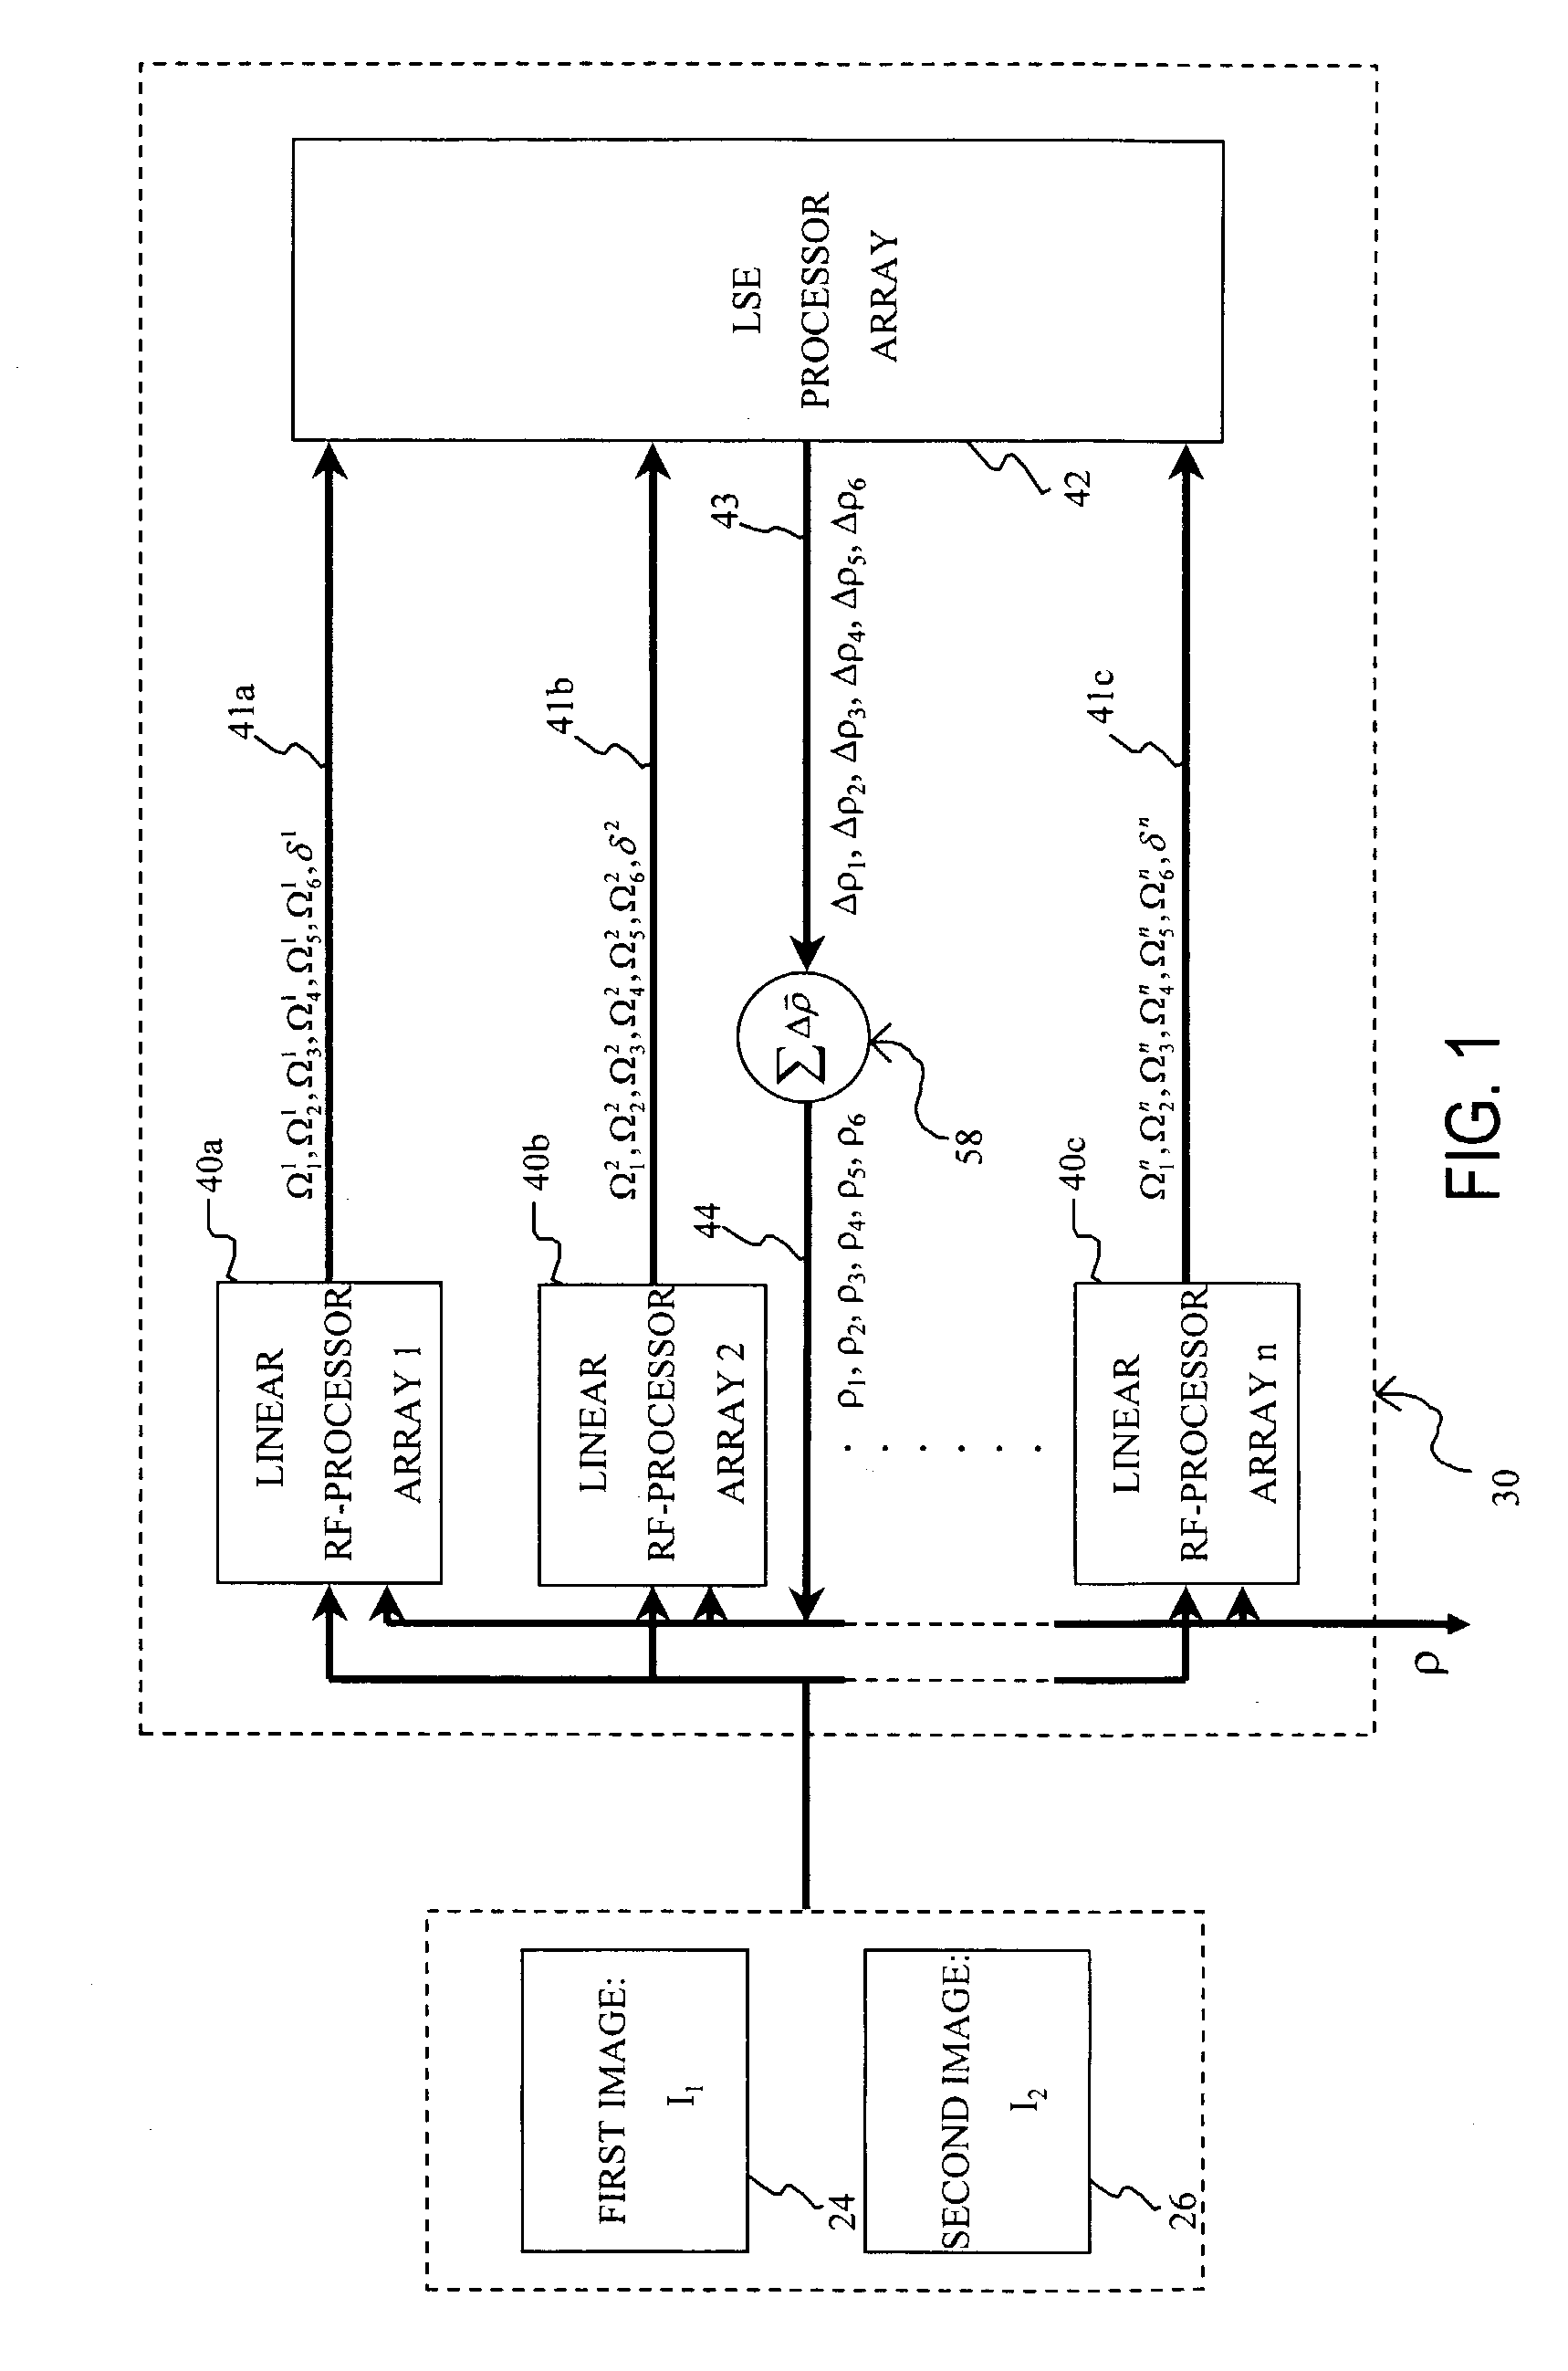 Affine transformation analysis system and method for image matching